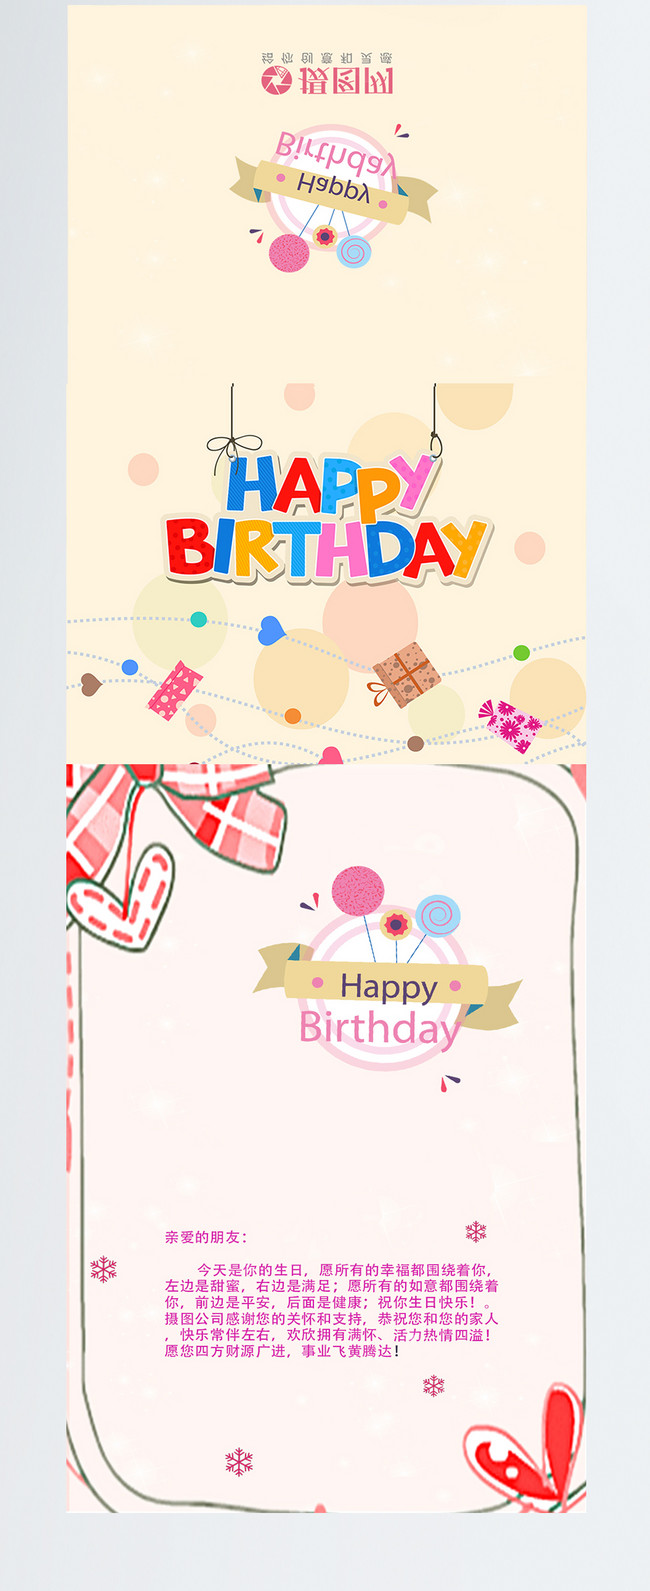 design patterns for birthday greeting cards